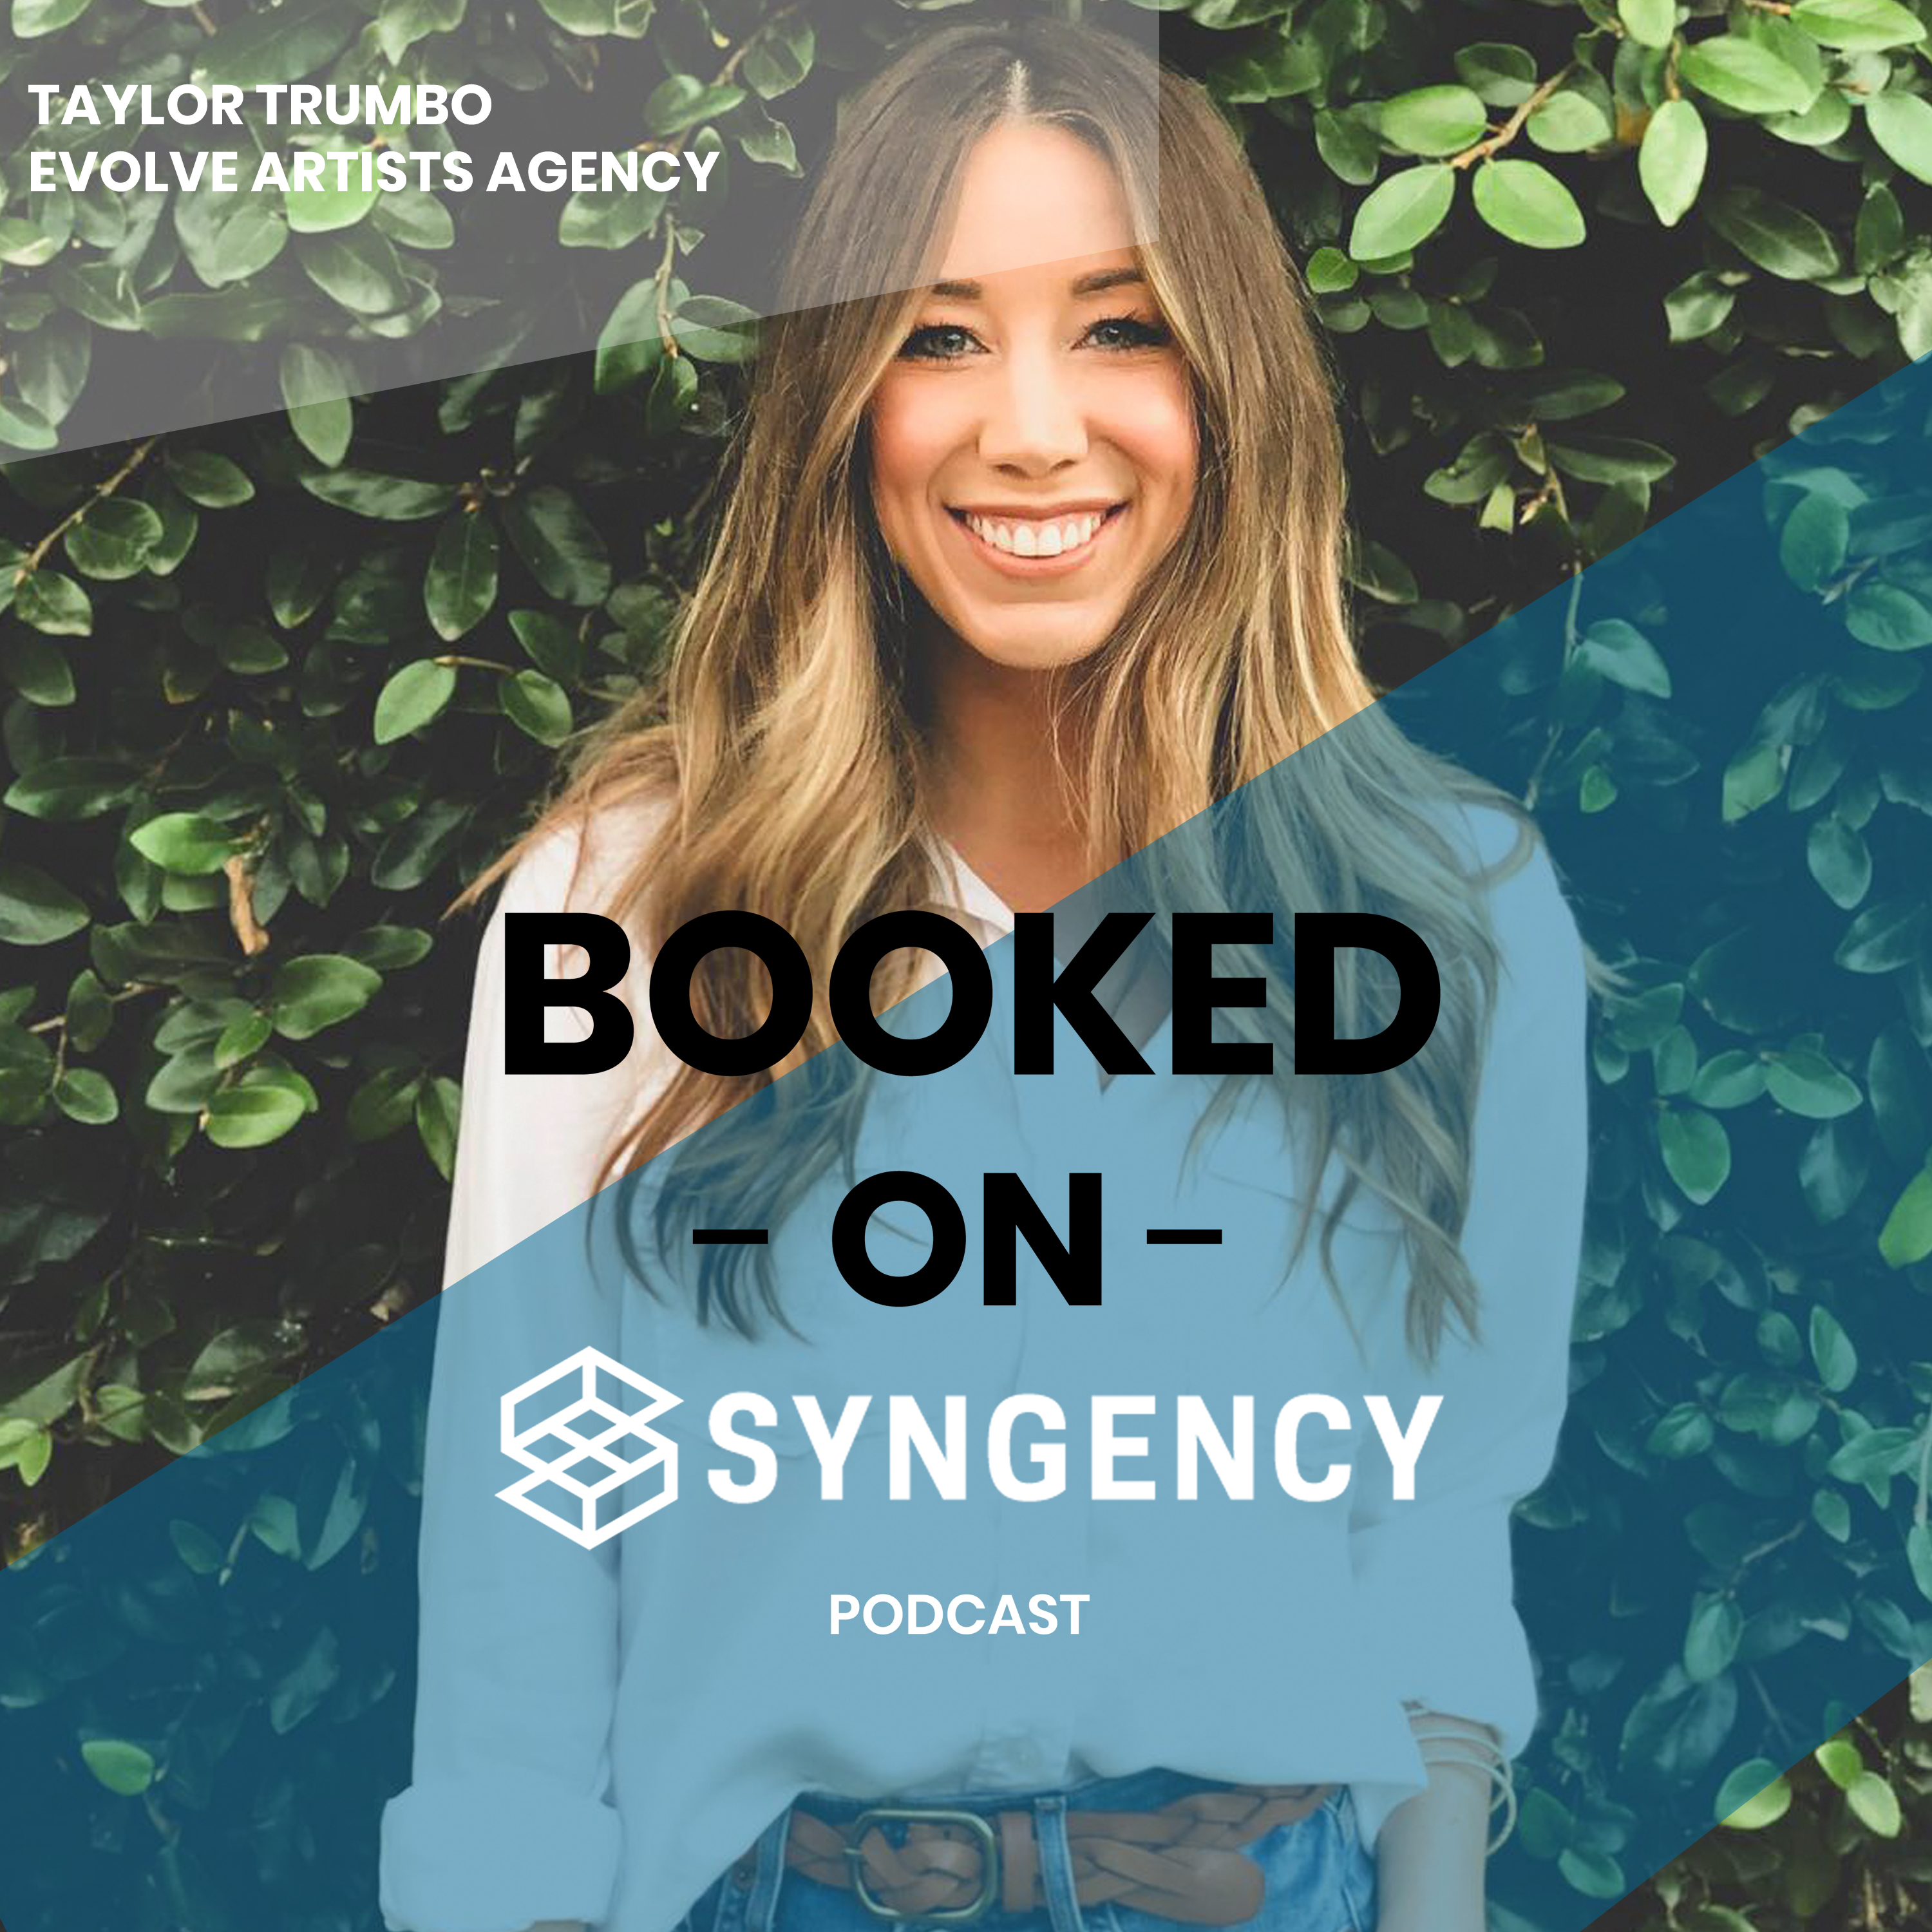 Booked On Syngency (Epi 2) w/ Taylor Trumbo of Evolve Artists Agency